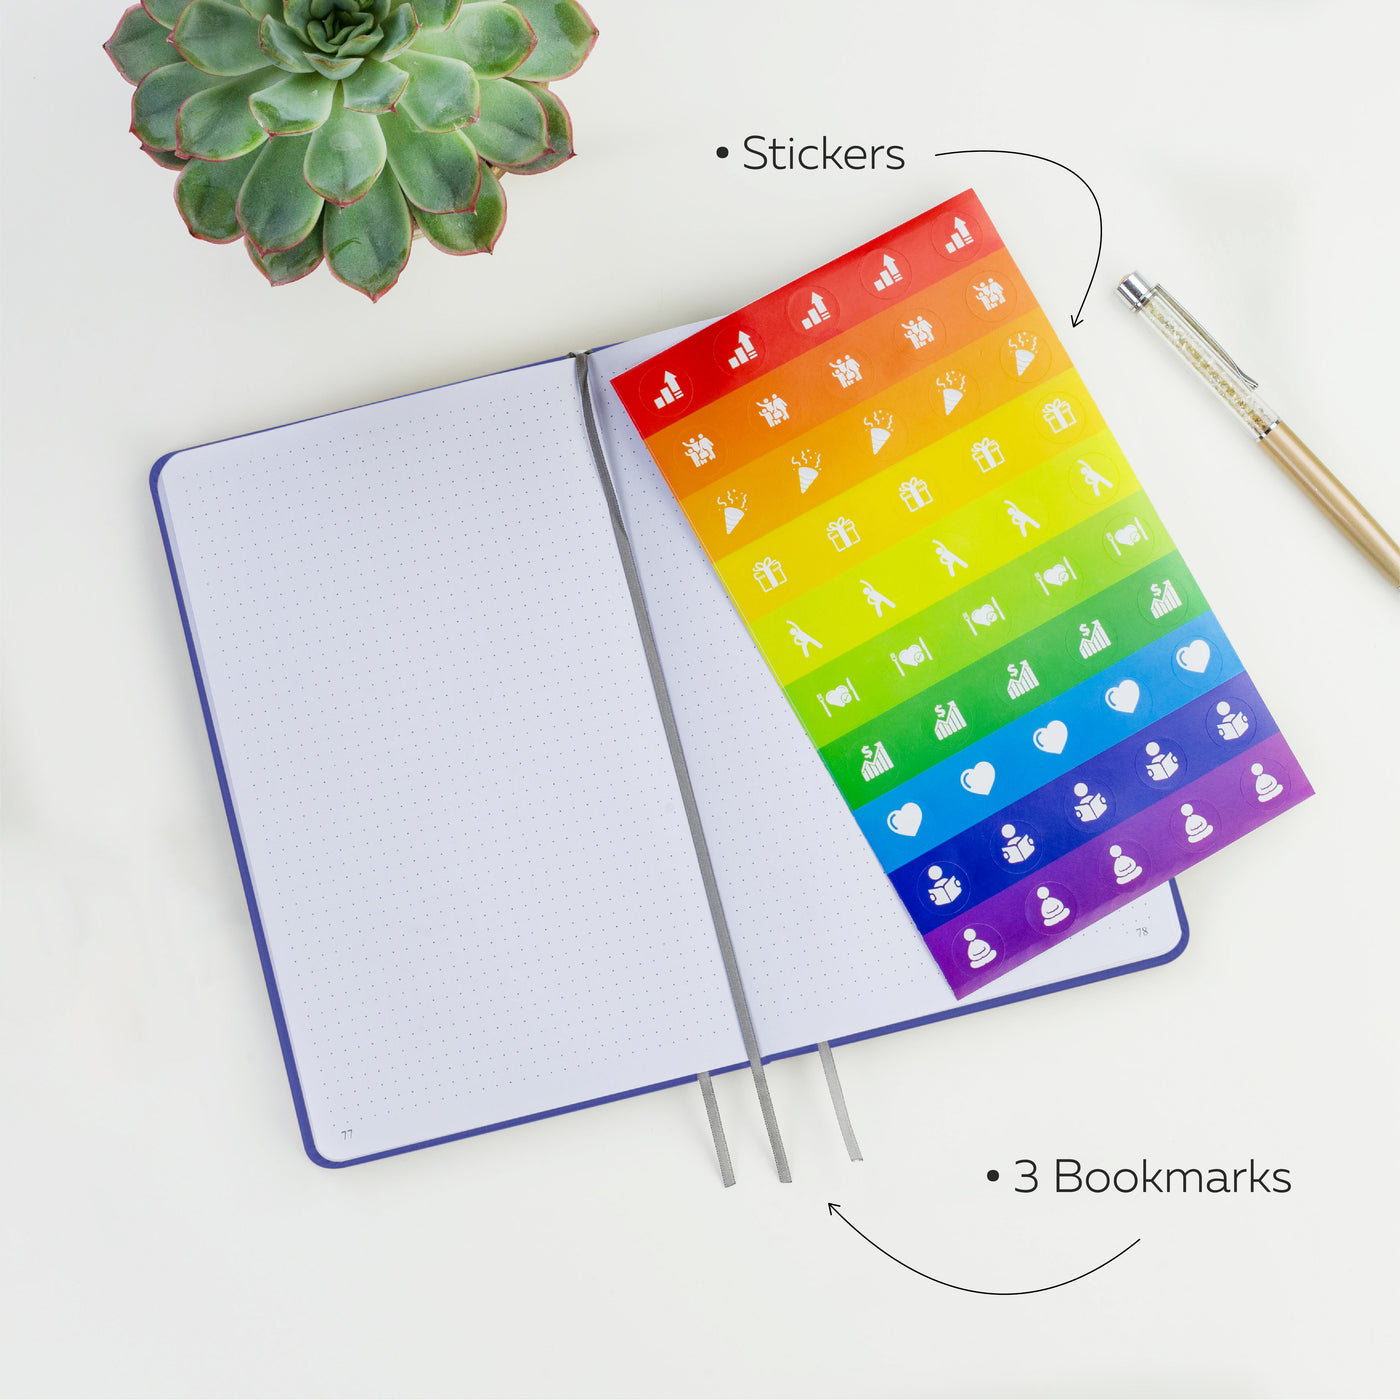 Dotted Grid Notebook/Journal - Find Clarity Through Pen & Paper